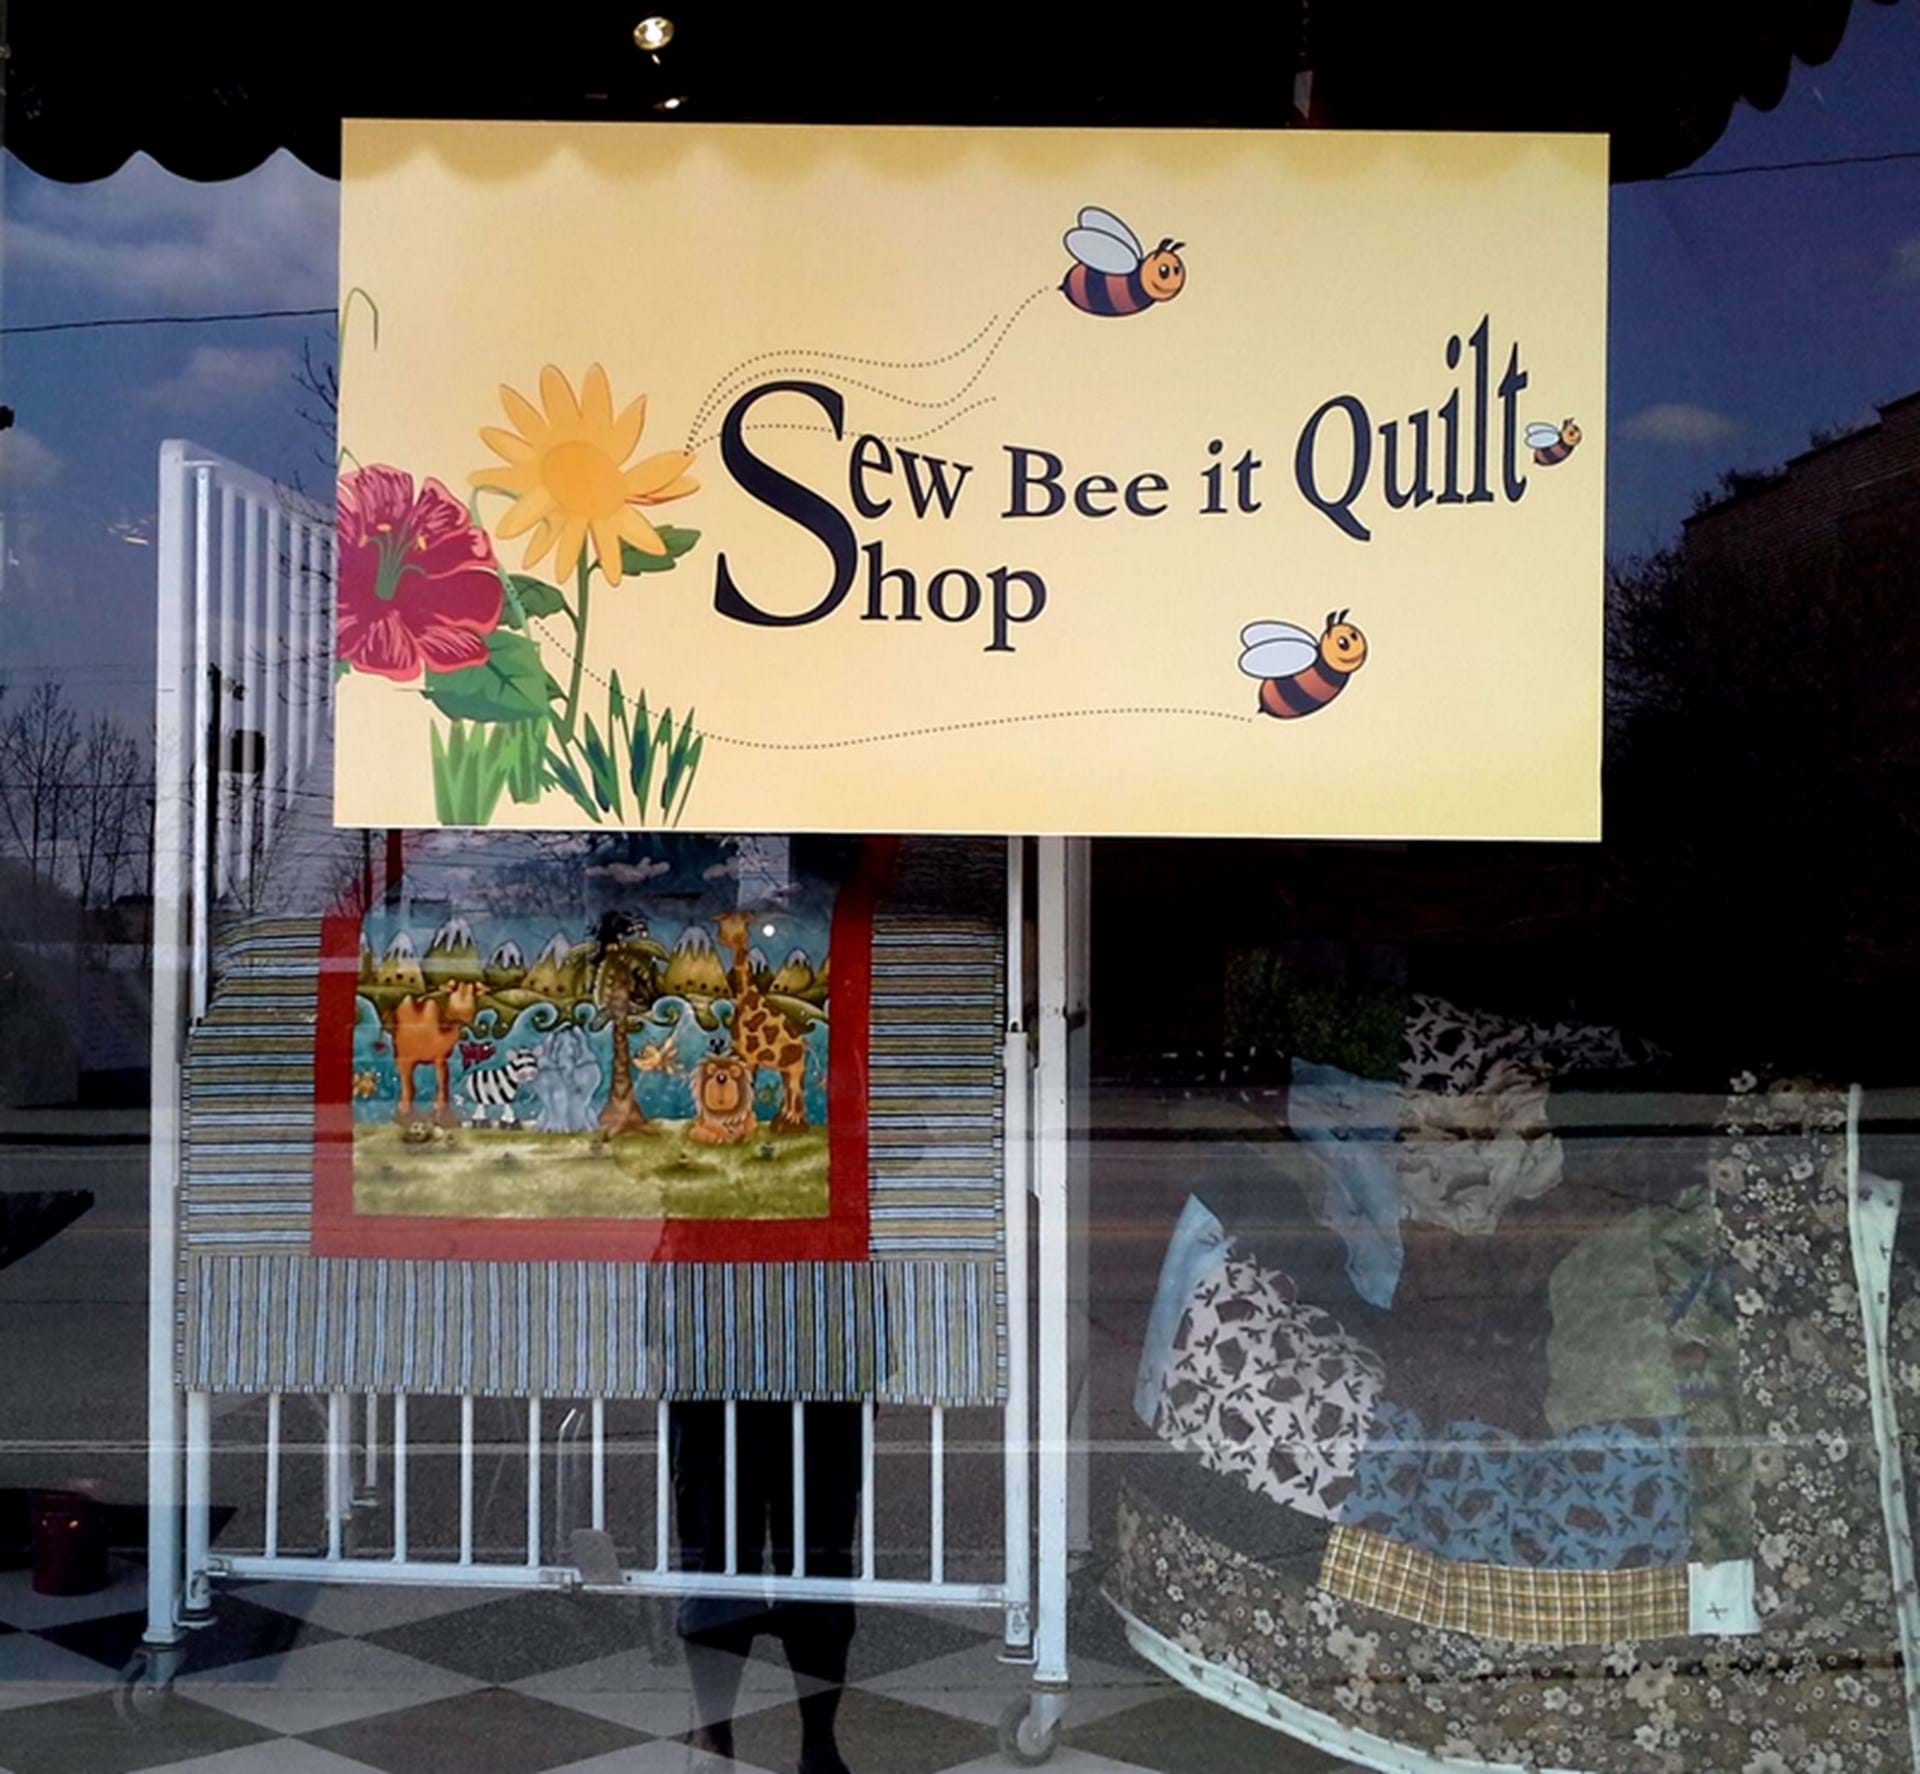 Sew Bee it Quilt Shop Store Front Sign